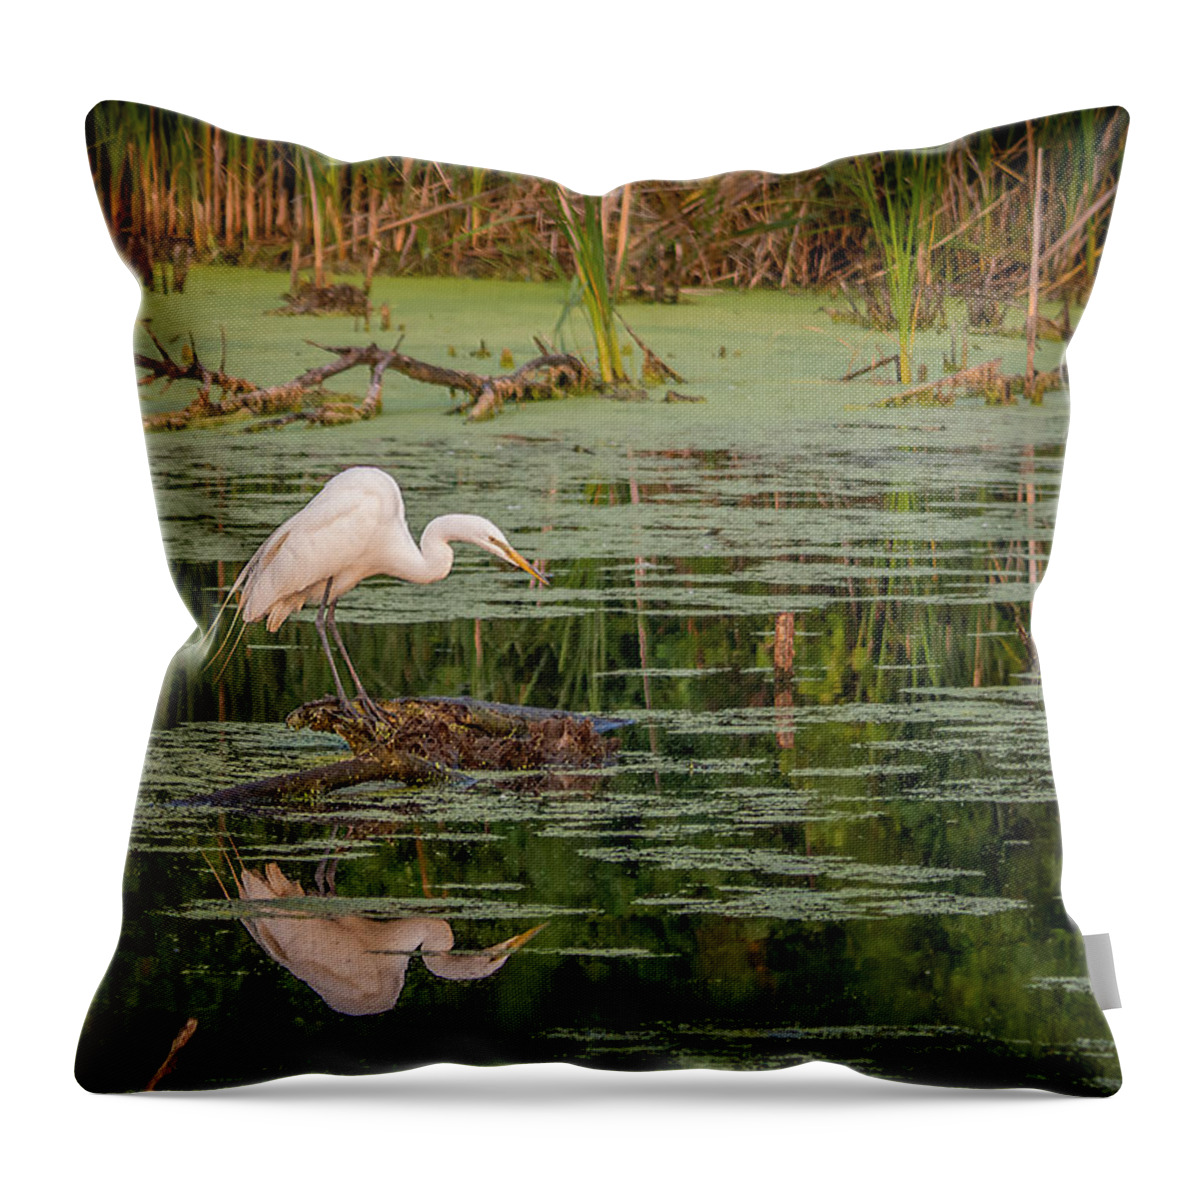 Wisconsin Throw Pillow featuring the photograph Roadside Reflection by Kristine Hinrichs